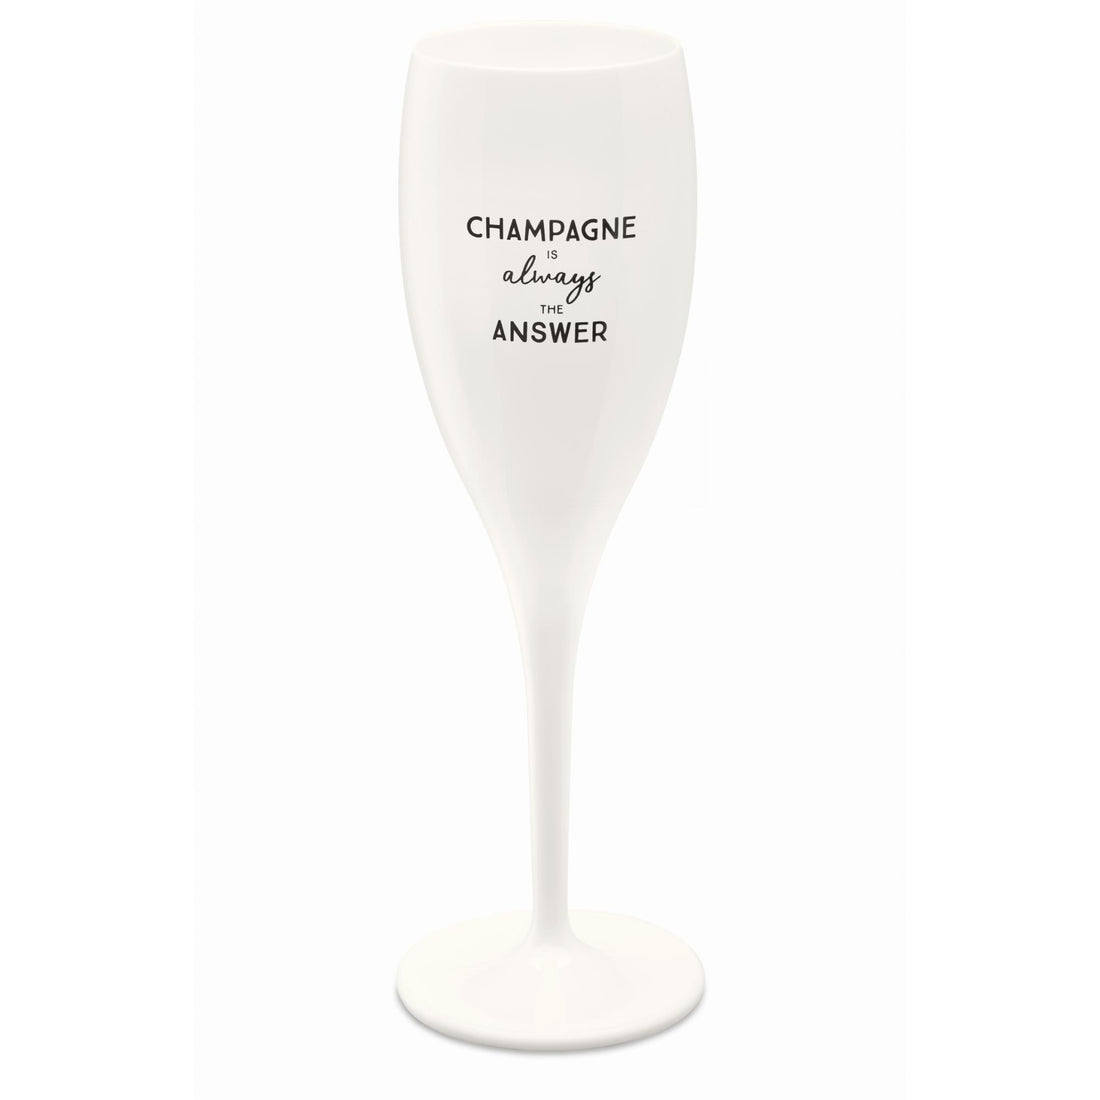 KOZIOL Calice Spumante Champagne 100ml Cheers No. 1 Champagne is The Answer Bianco